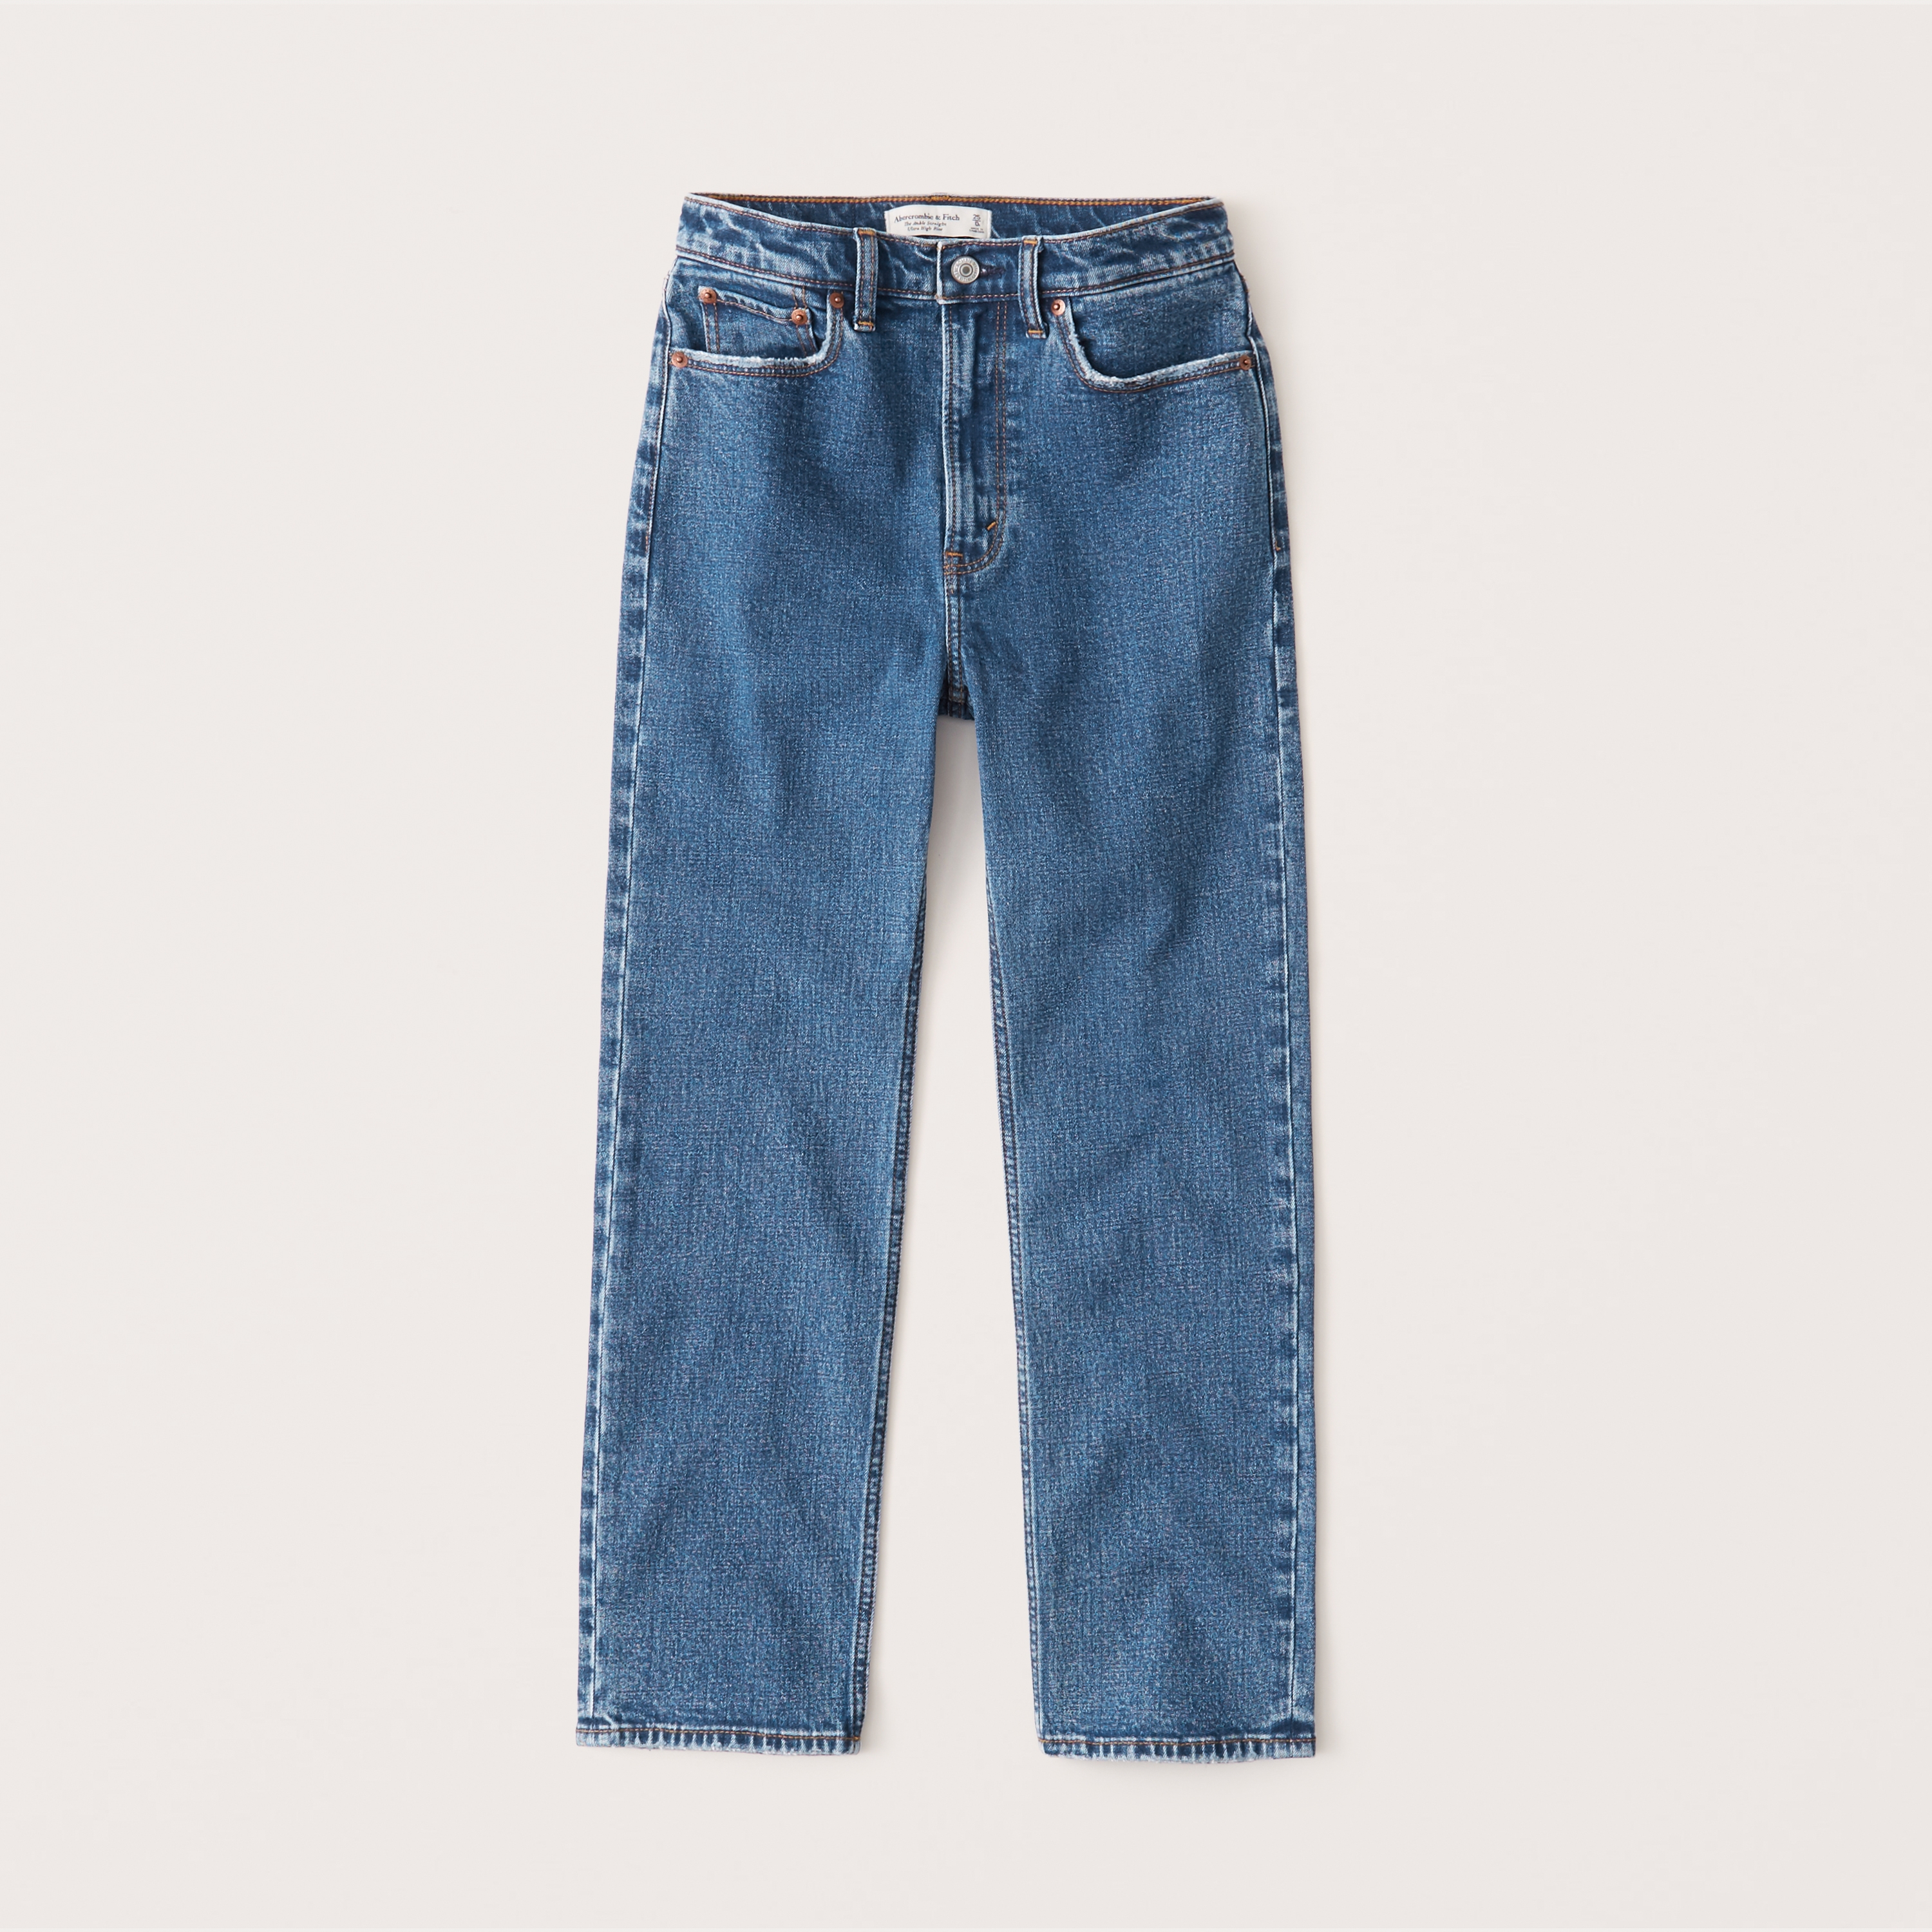 abercrombie and fitch zoe jeans